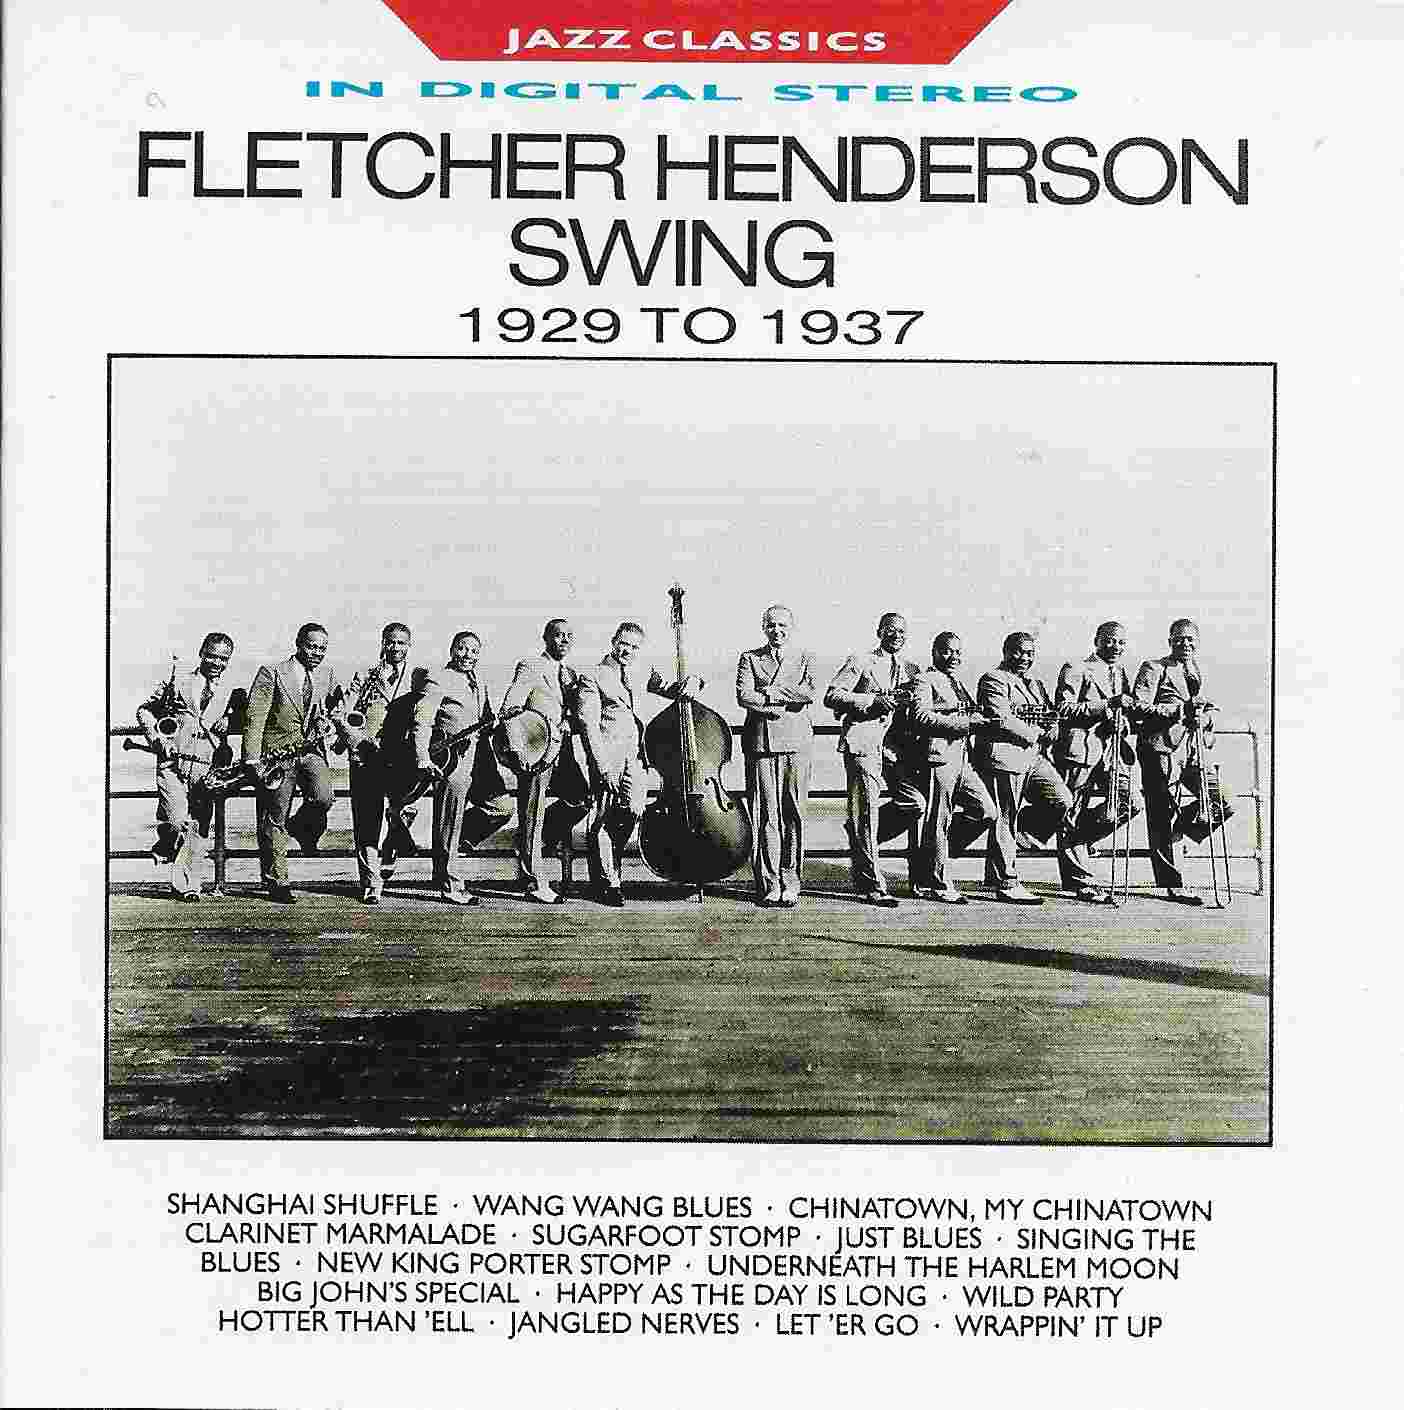 Picture of BBCCD682 Jazz classics - Fletcher Henderson Swing 1929 - 1937 by artist Fletcher Henderson  from the BBC cds - Records and Tapes library